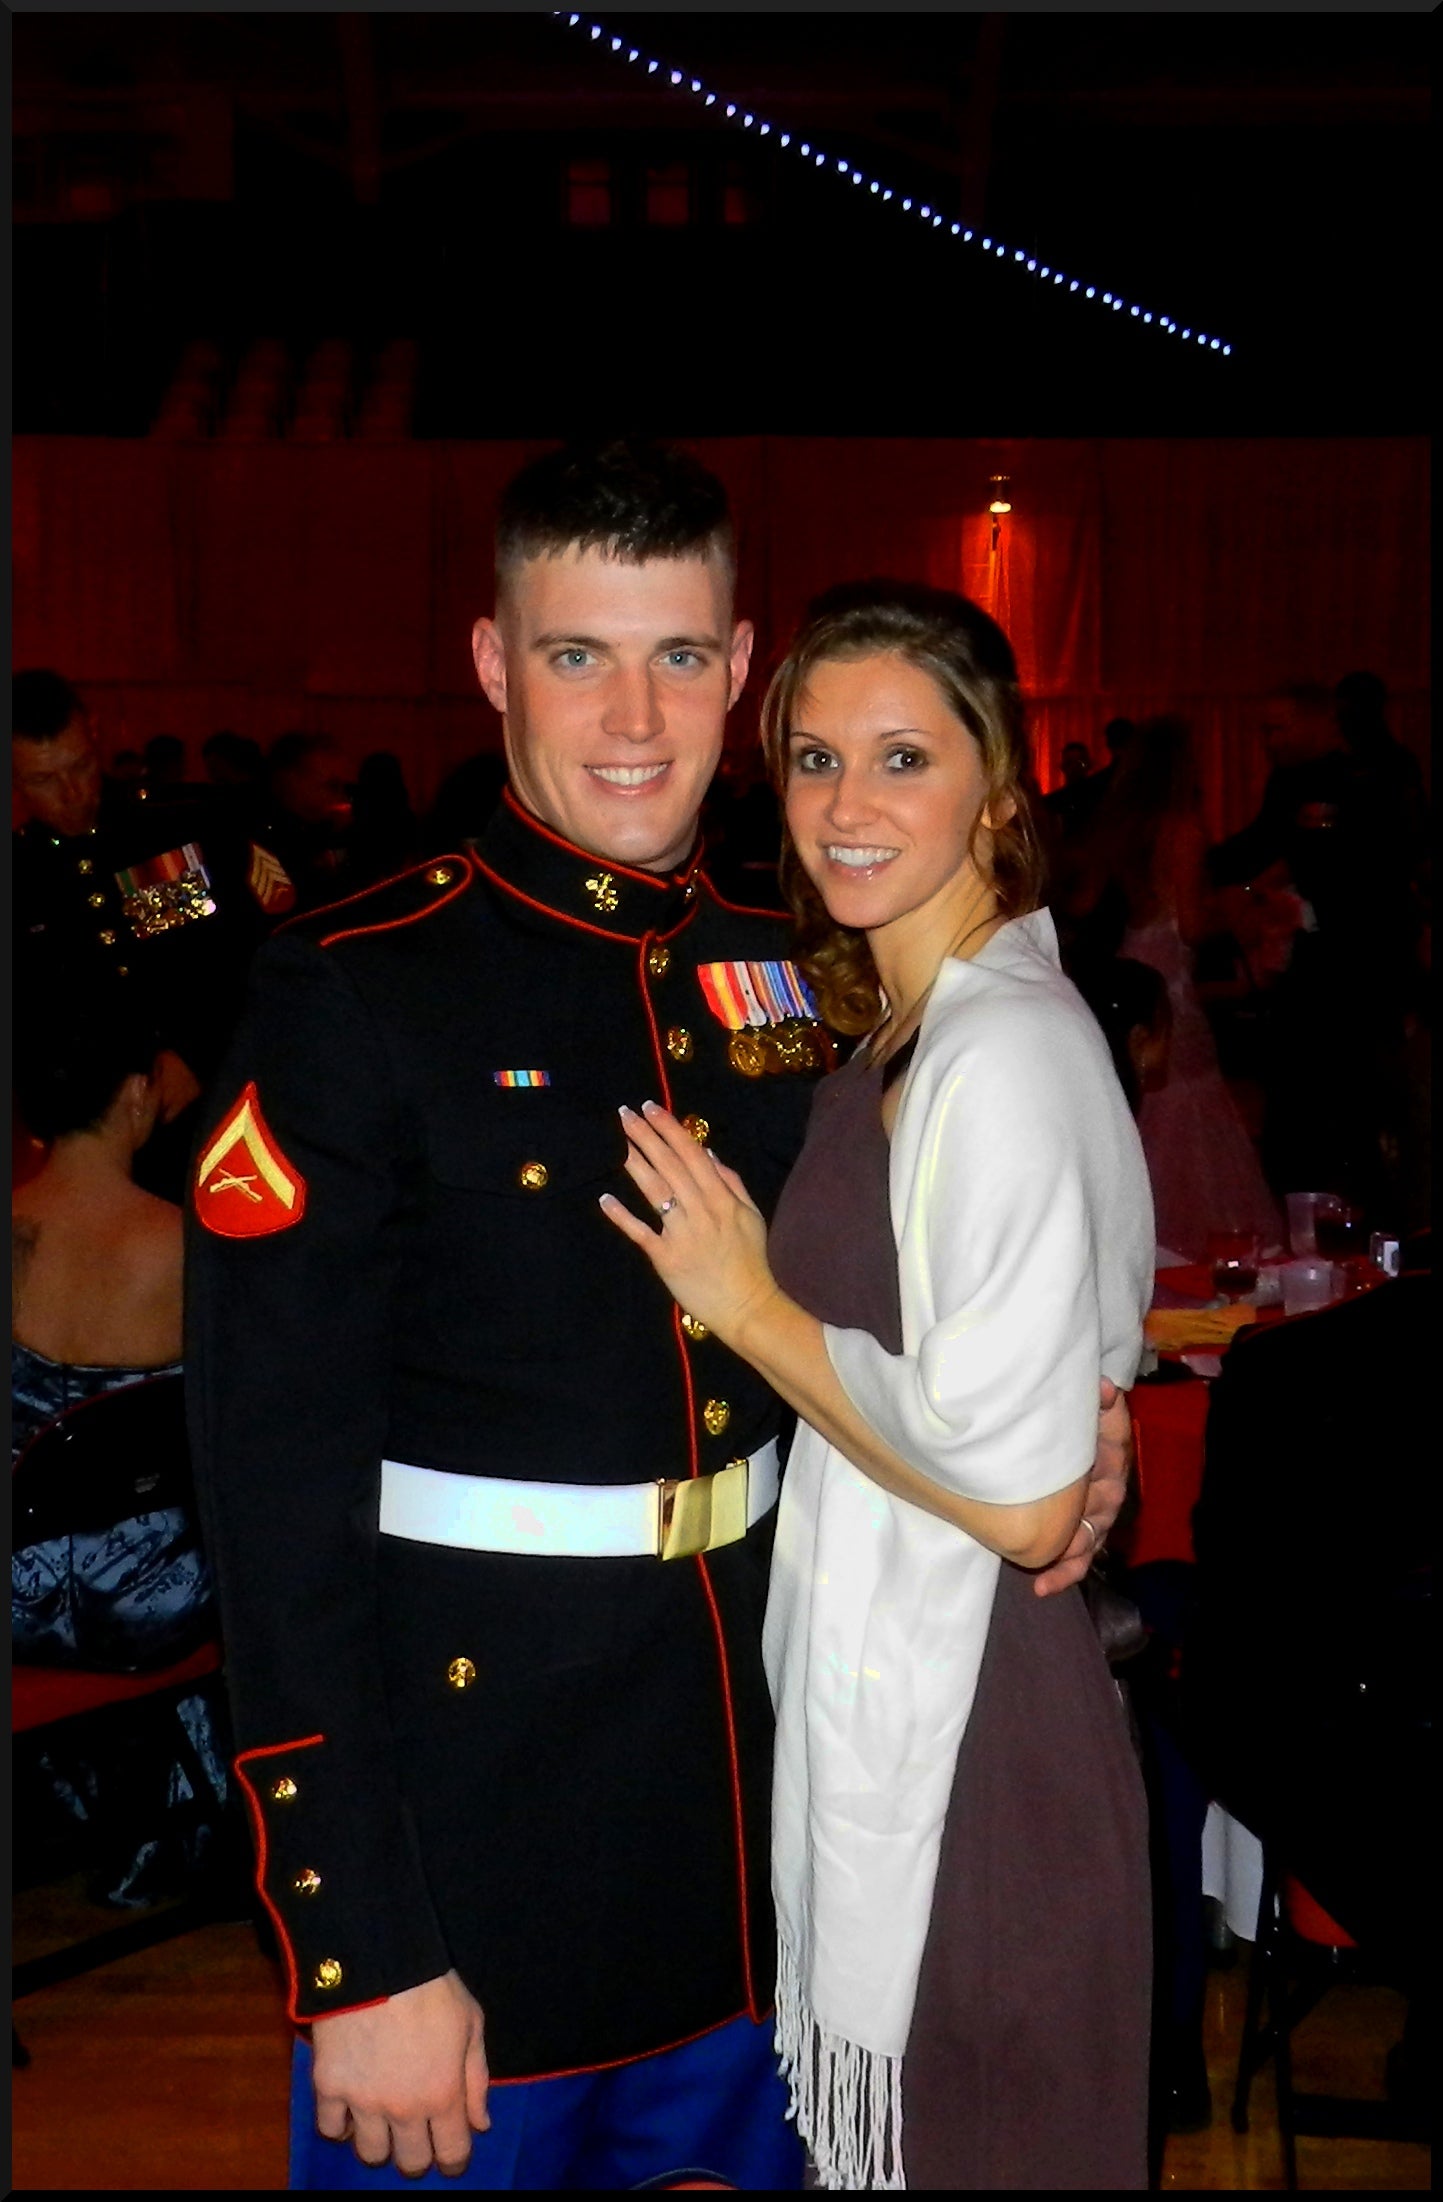 Ben Adams and his wife at a formal event